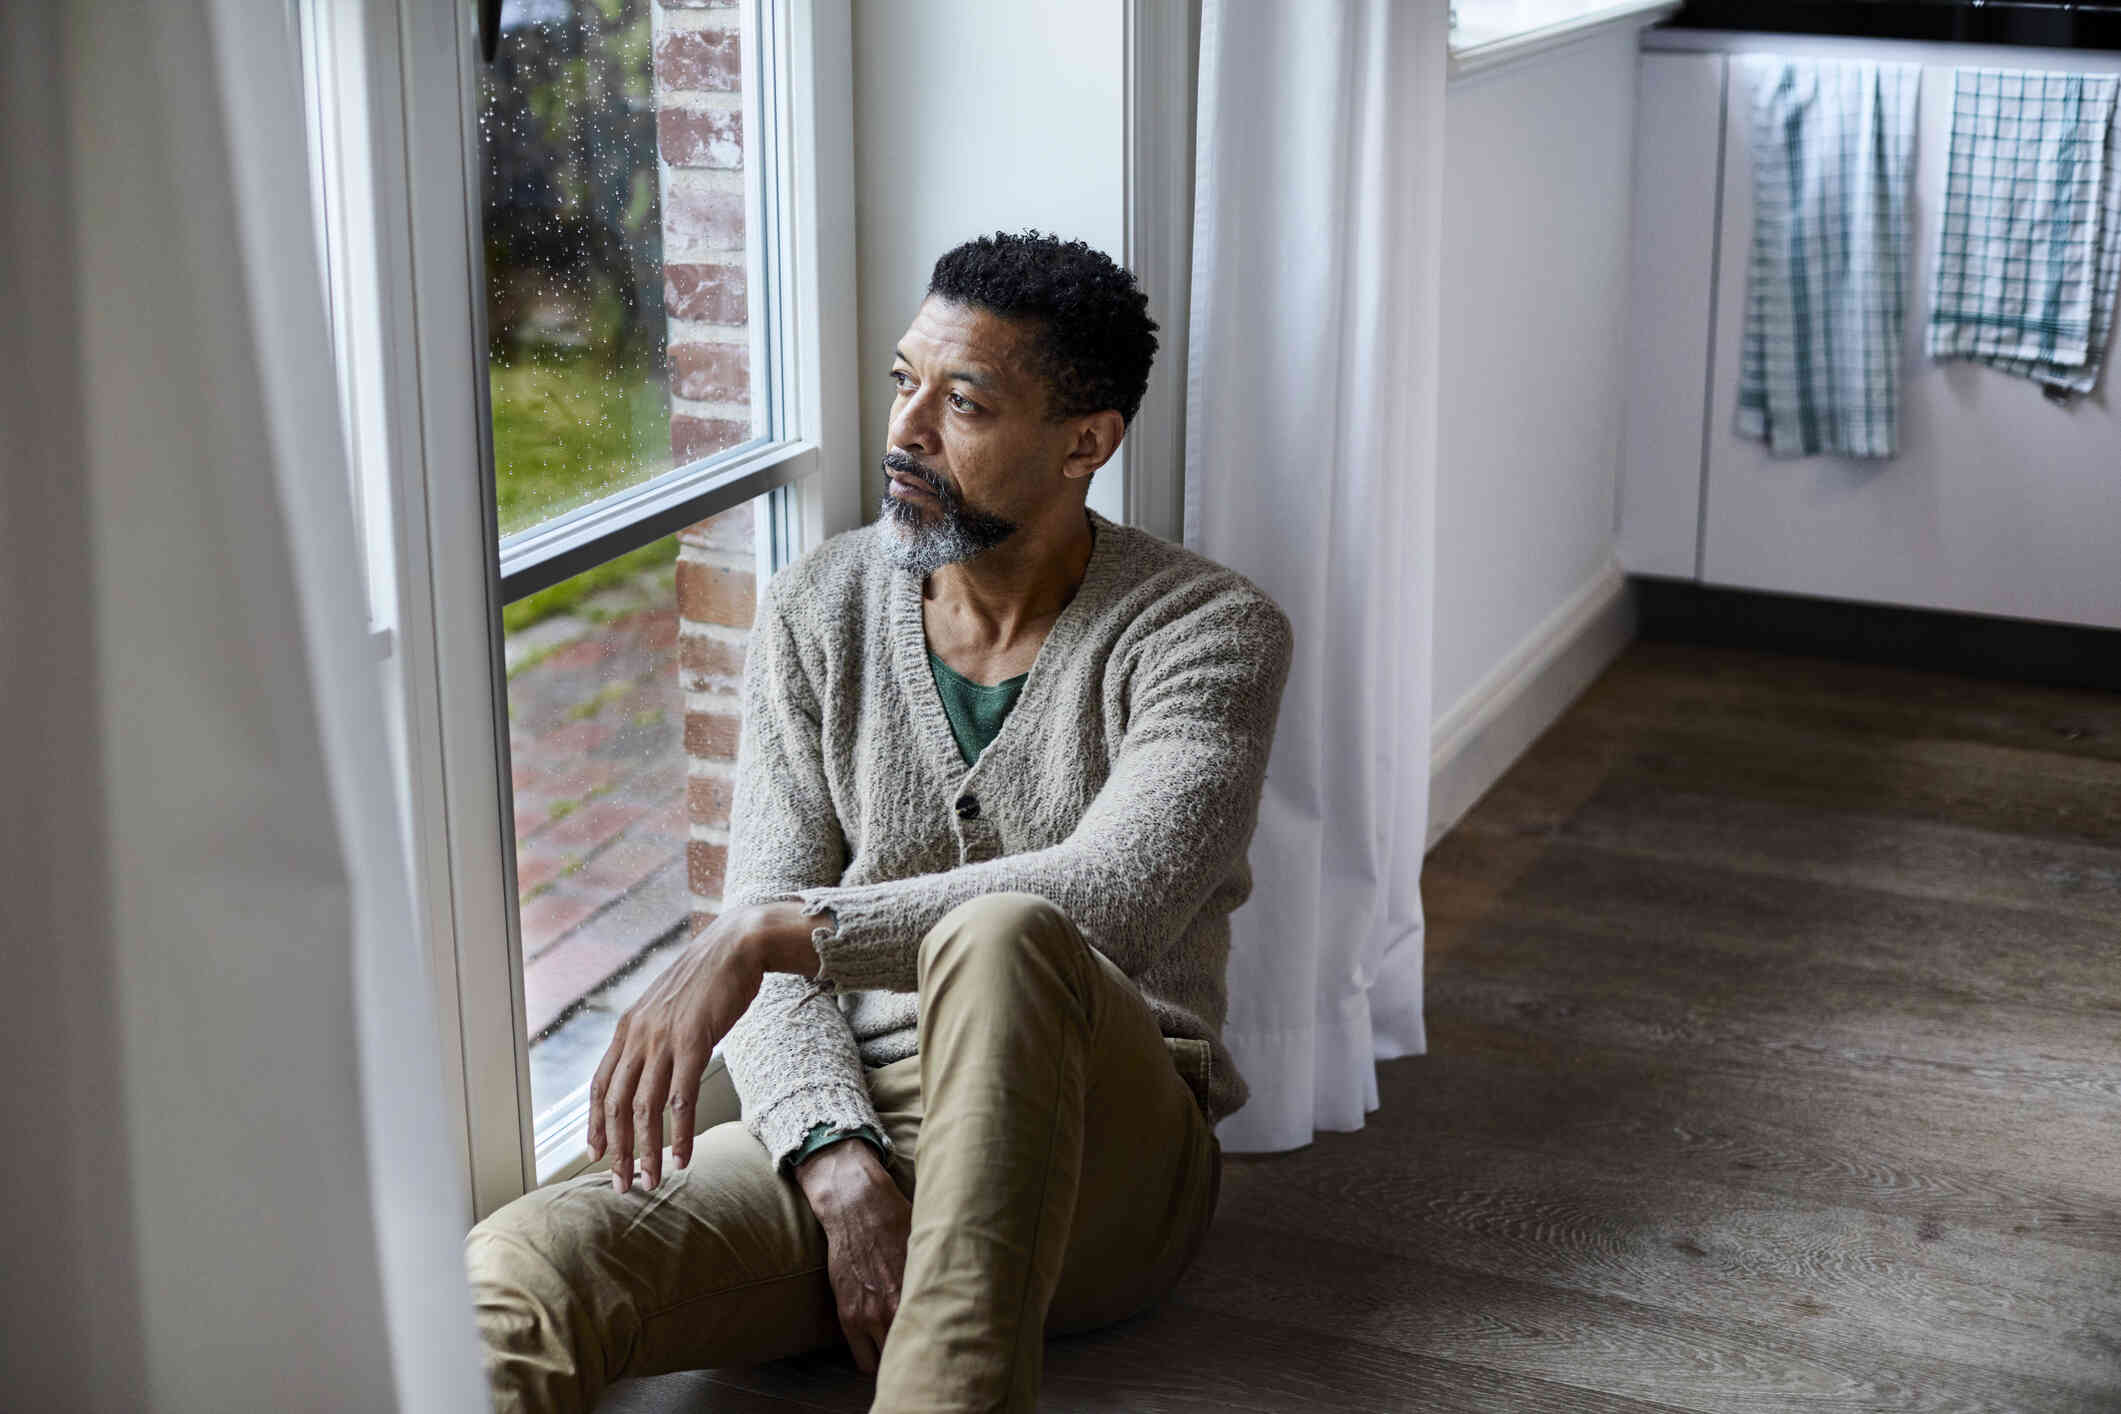 A middle aged man in a grey sweater sits on the floor of his home near a wondow and gazes out while deep in thought.